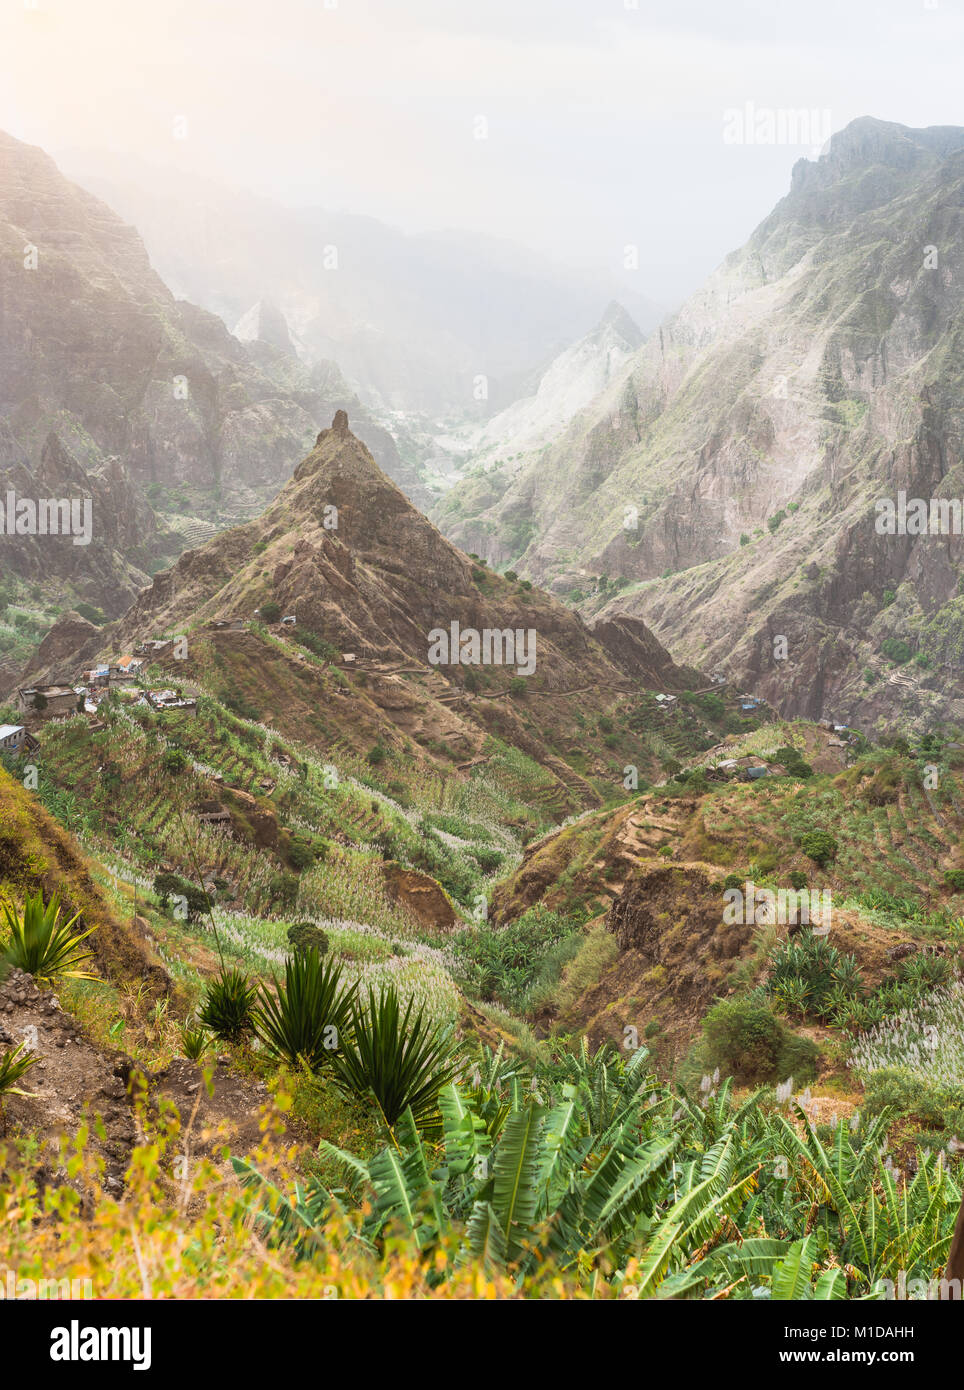 Mountain peaks in Xo-Xo valley of Santa Antao island in Cape Verde. Landscape of many cultivated plants in the valley between high rocks. Arid and erosion mountain peaks under hot sun light Stock Photo